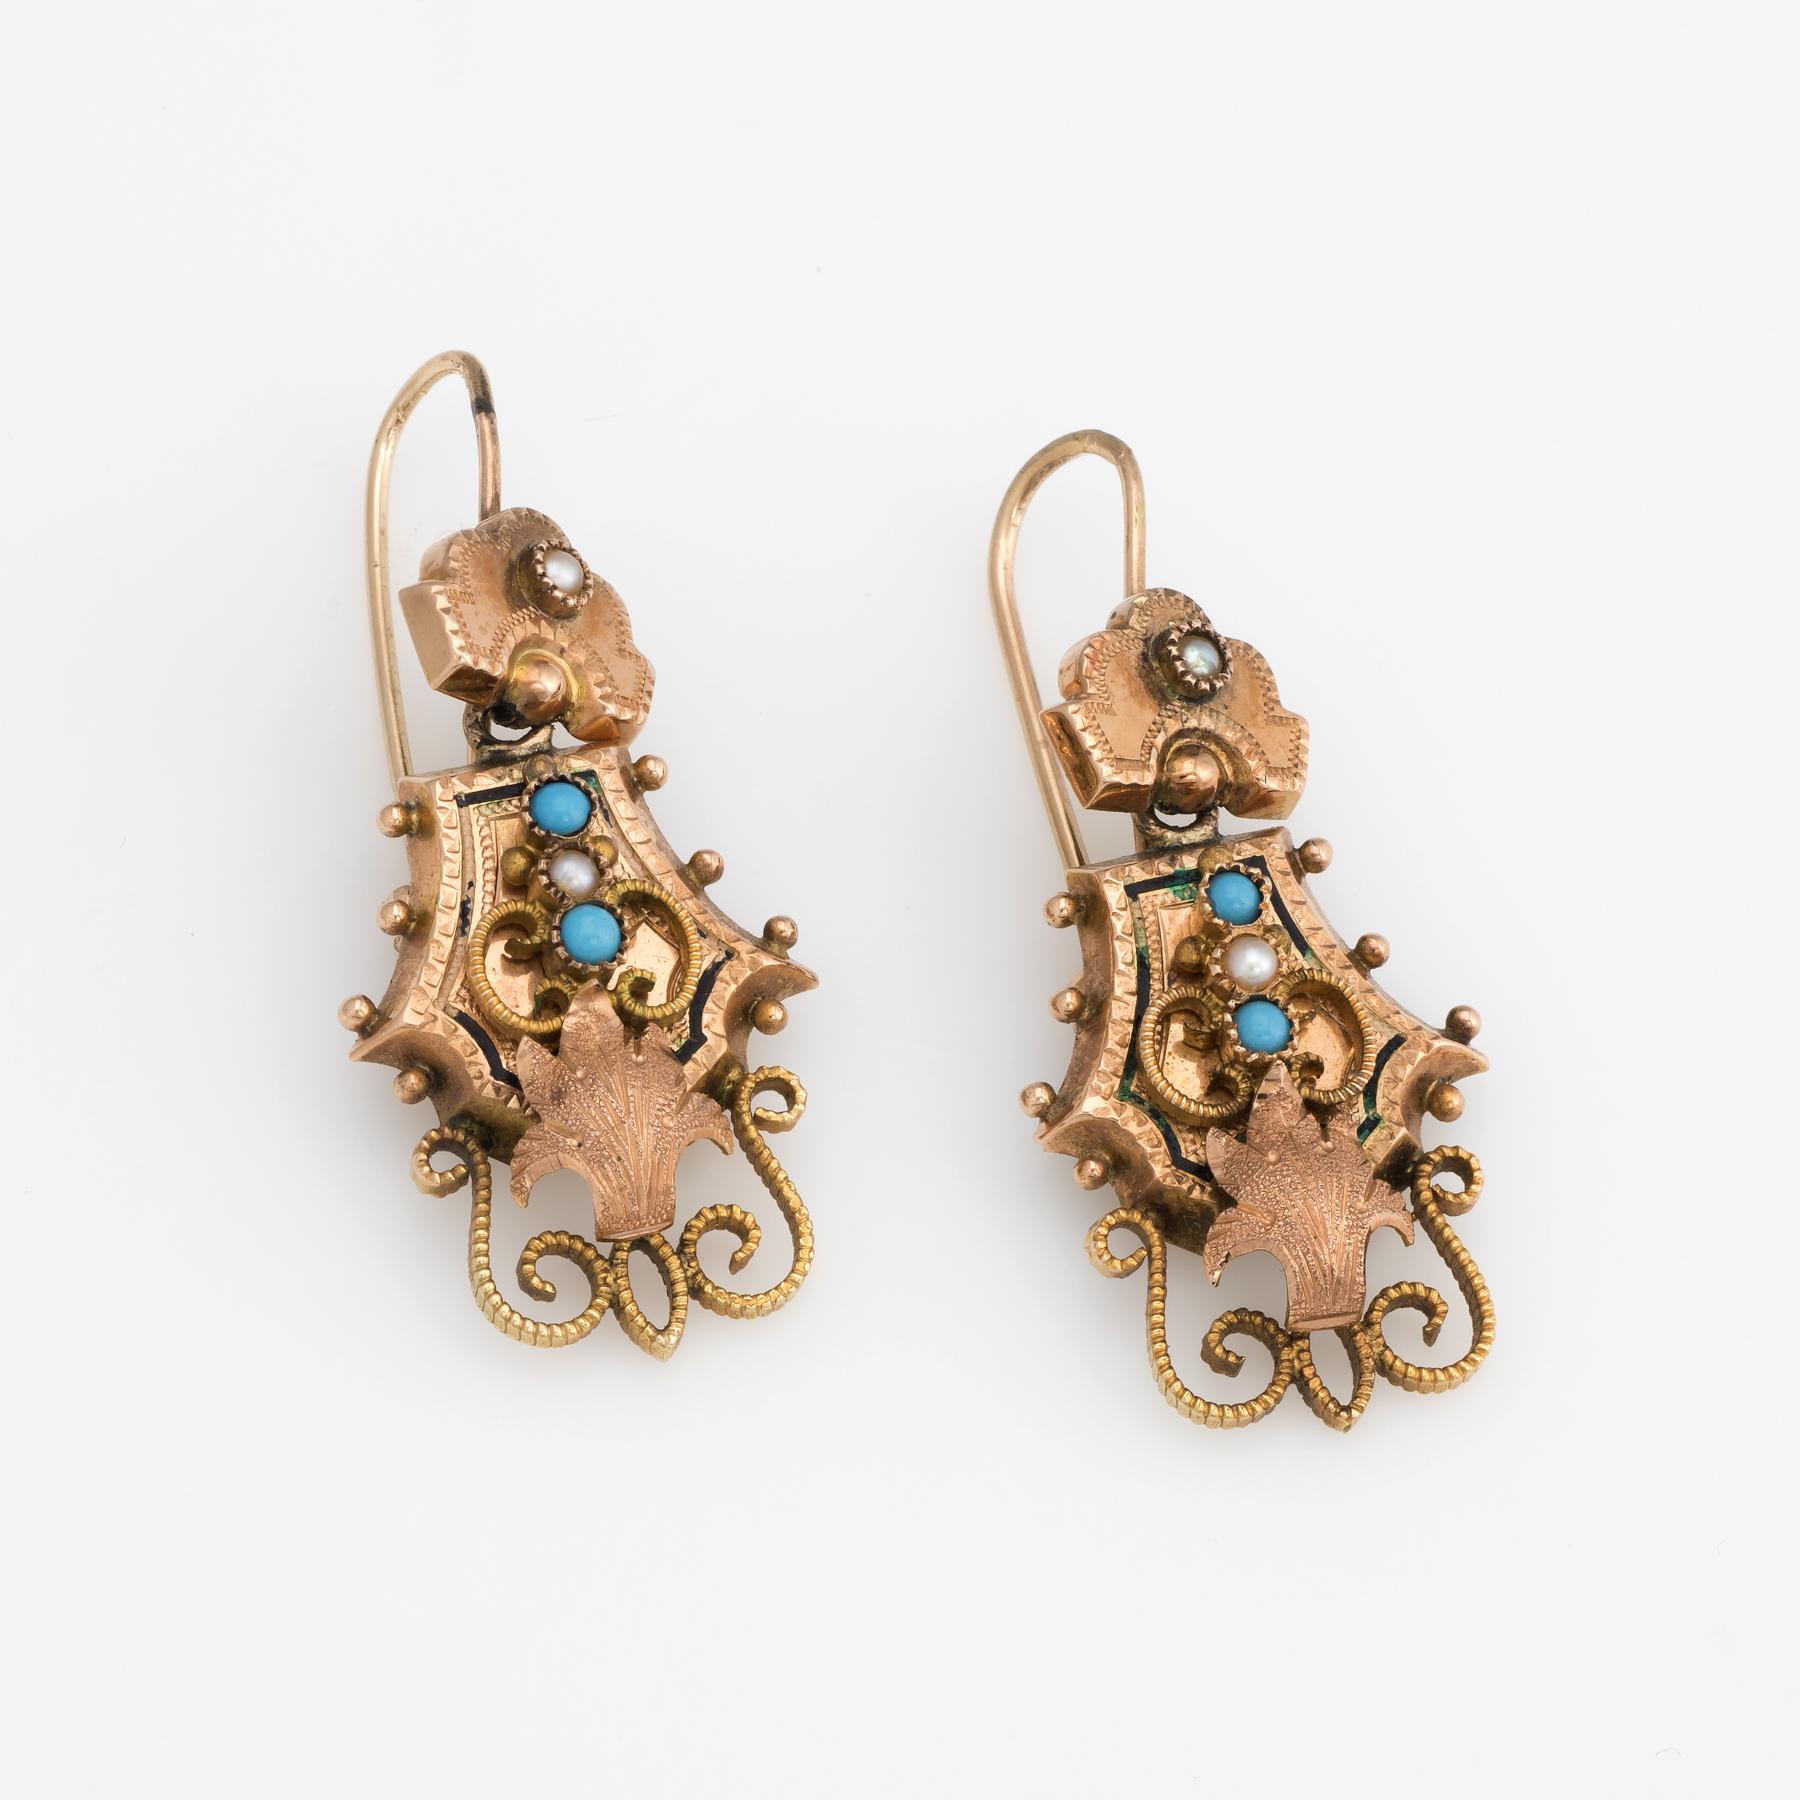 Elegant pair of antique Victorian earrings (circa 1880s to 1900s), crafted in 10k rose gold. 

Four cabochon cut pieces of turquoise measure 1.5mm, accented with four 1.5mm seed pearls.  

The striking earrings feature foliate detail to the scrolled